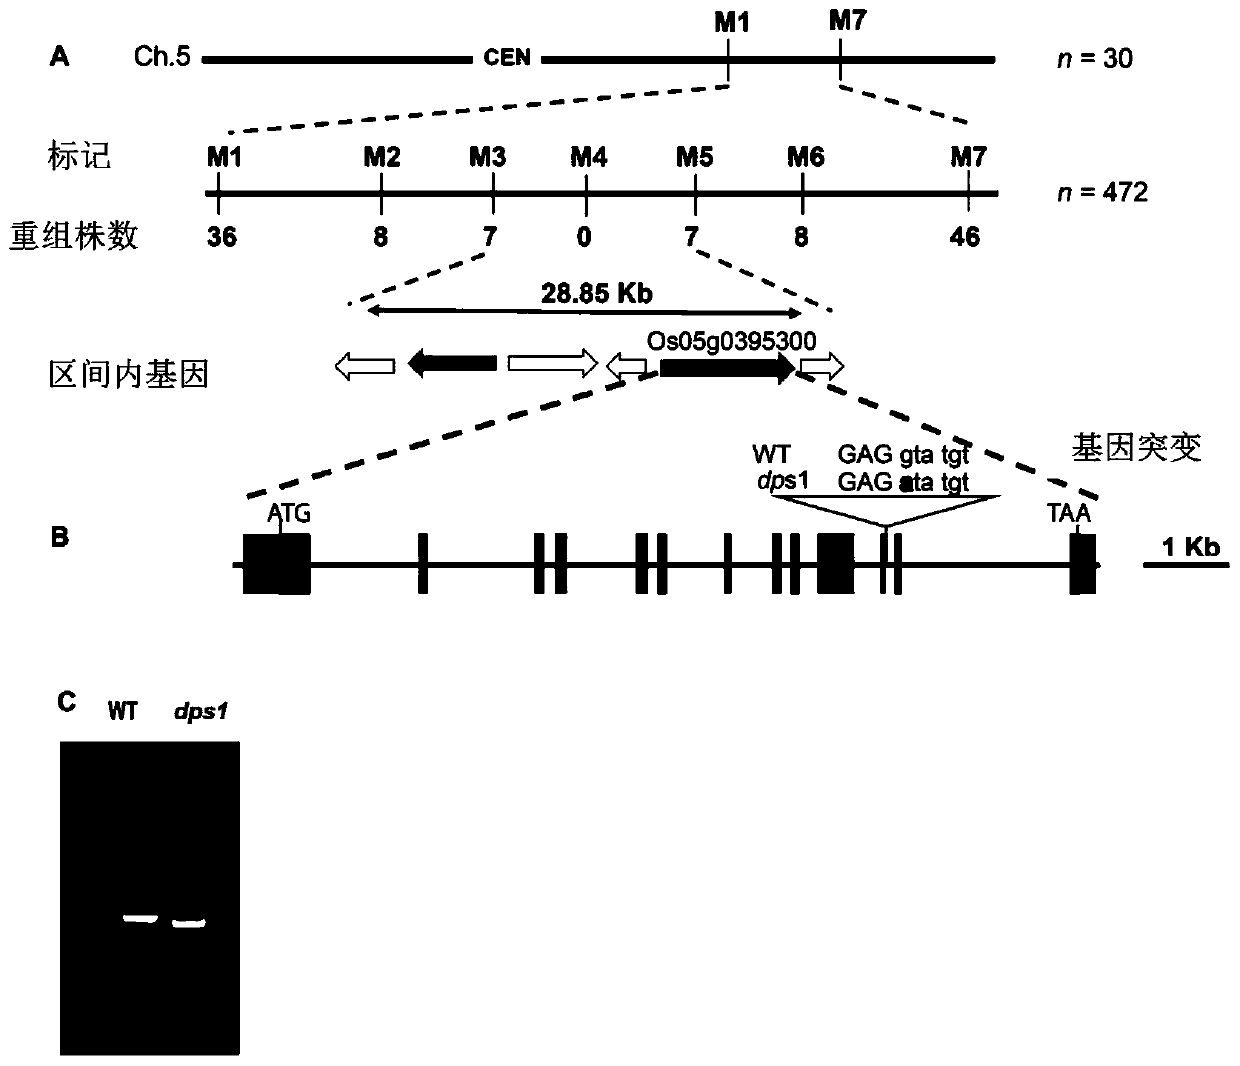 Rice DPS1 gene and encoded protein and application thereof